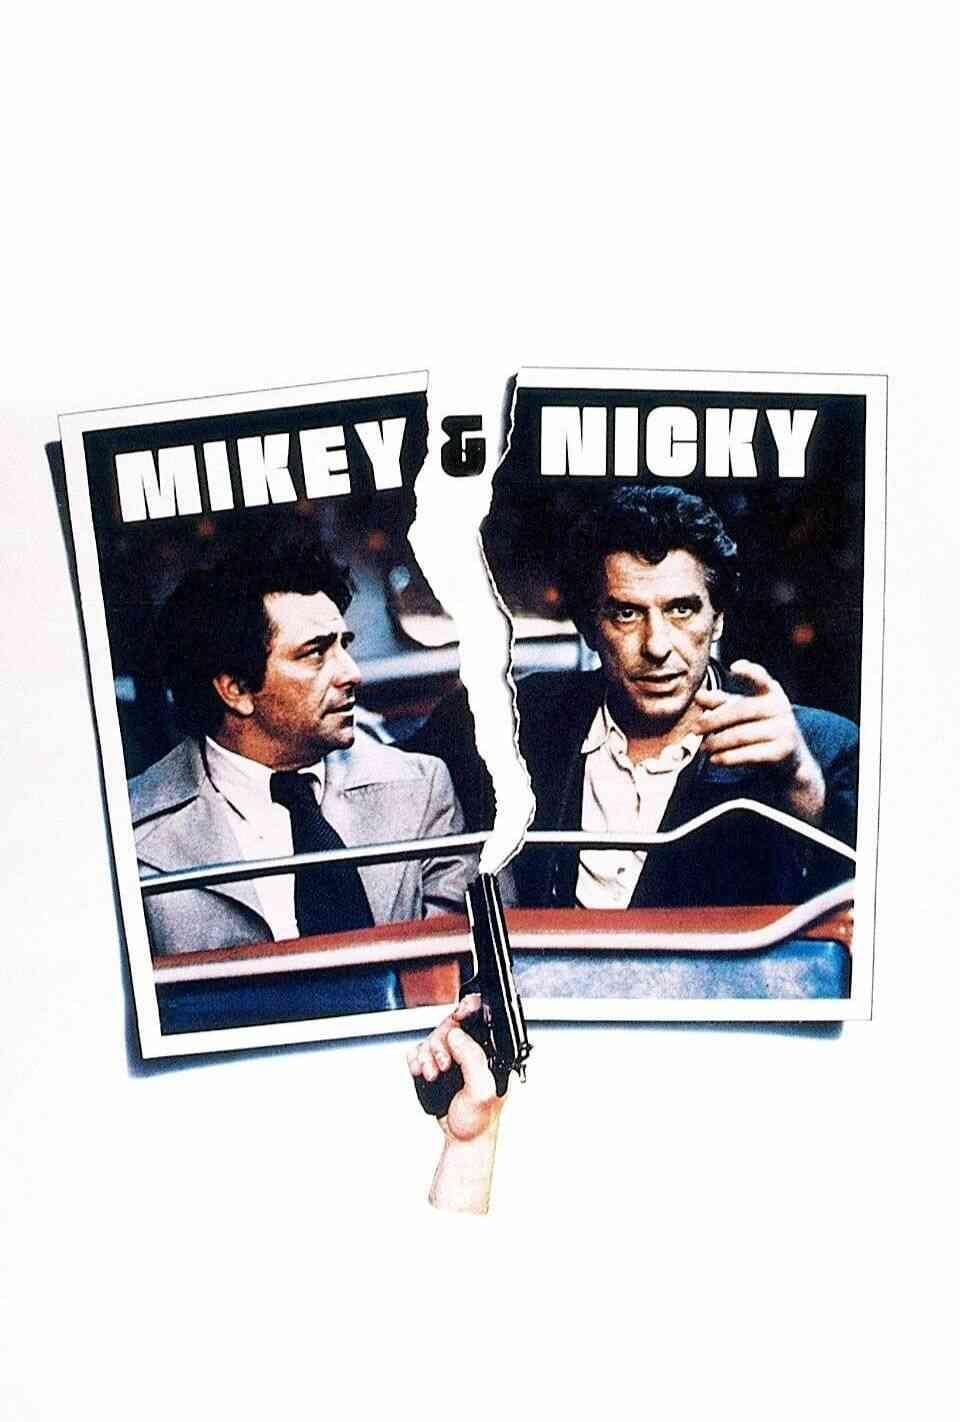 Read Mikey and Nicky screenplay (poster)